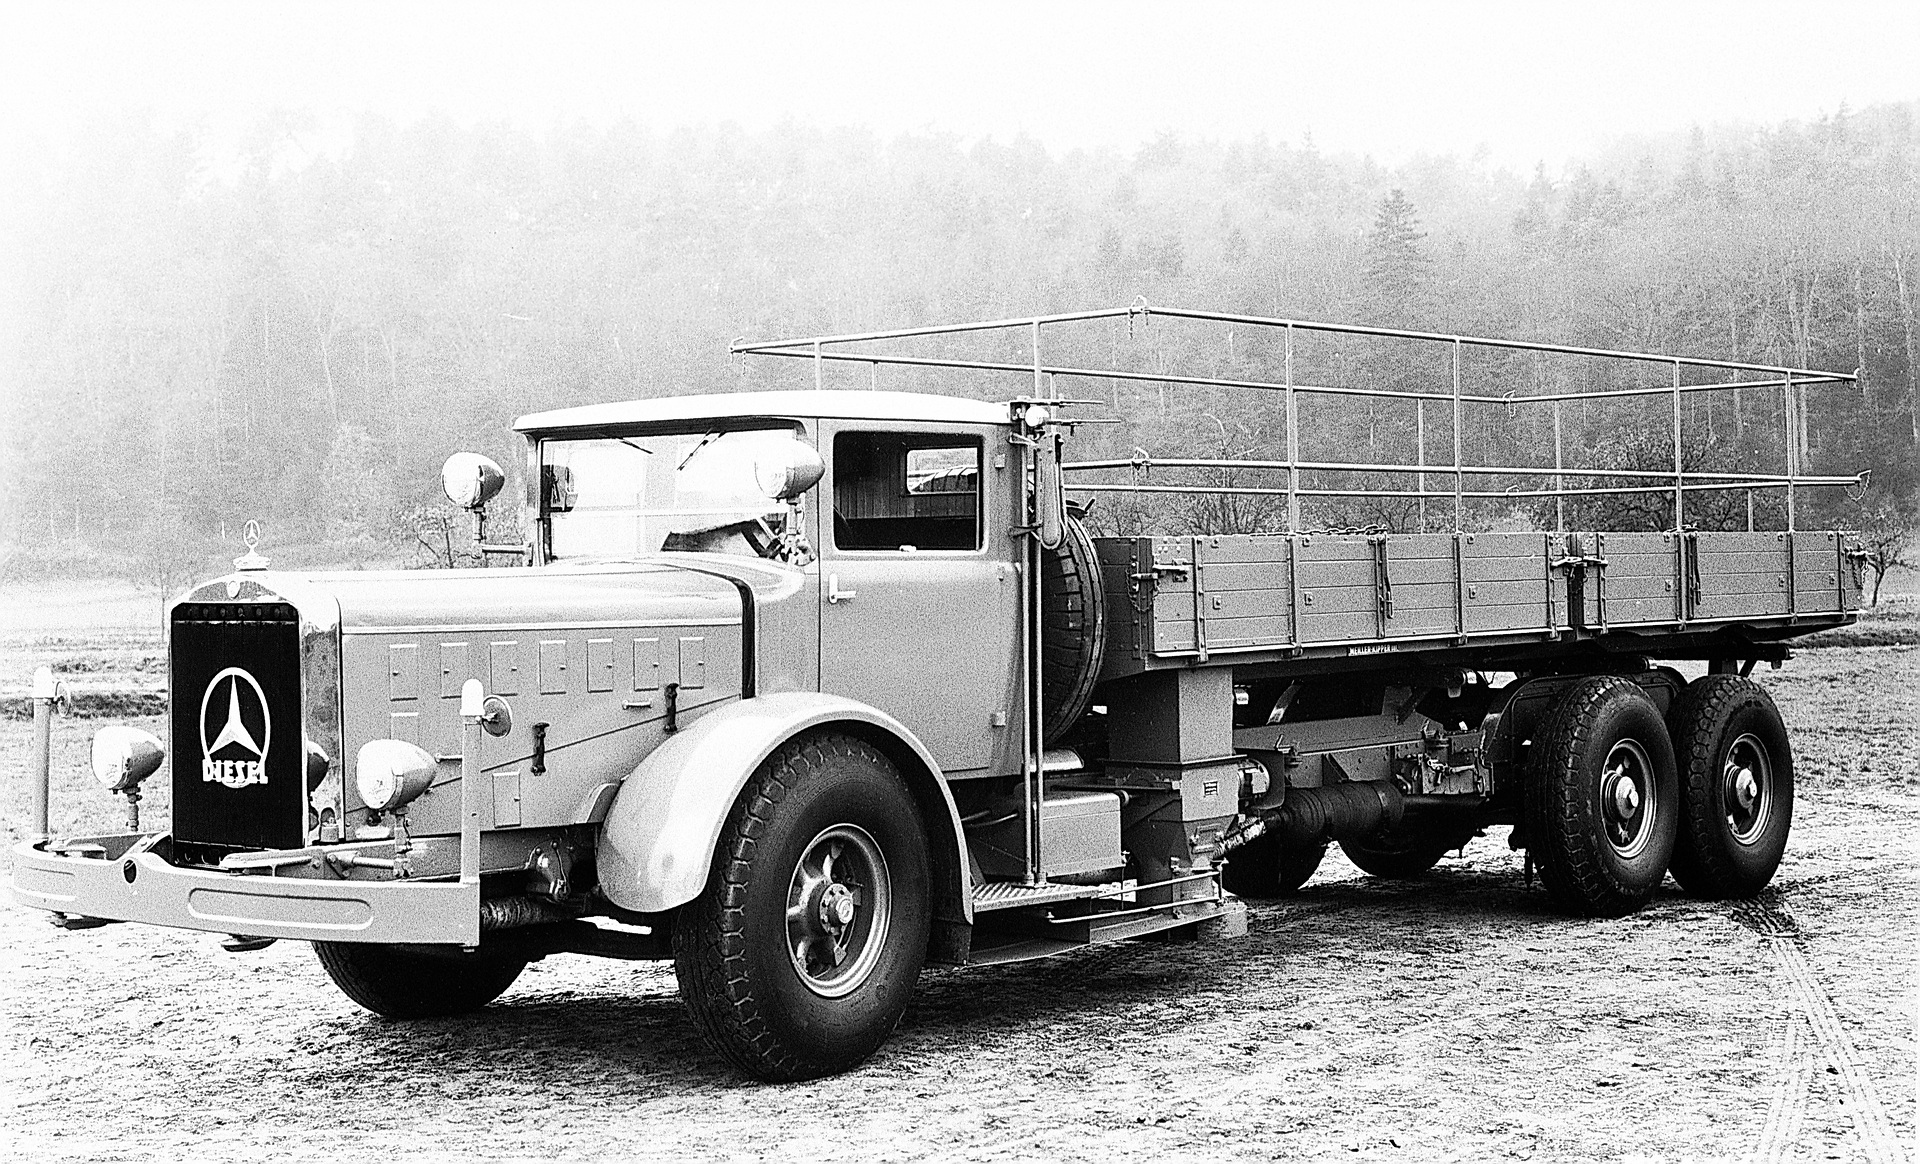 125 Years of Experience in Construction: From Daimler's vehicles with a payload of five metric tons to Arocs with MirrorCam